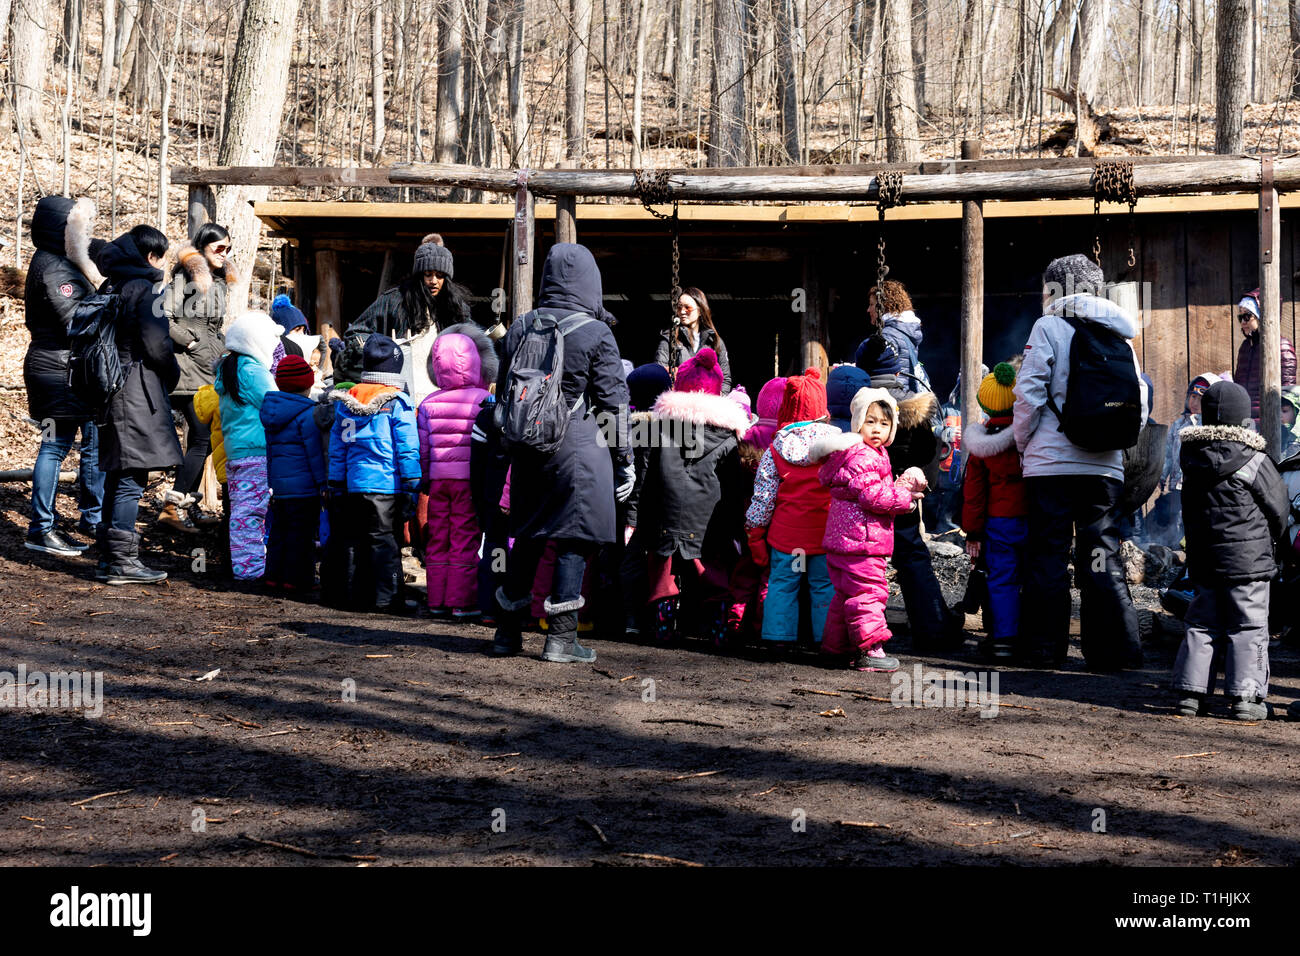 School class at maple syrup demonstration in sugar bush Ontario Canada Stock Photo